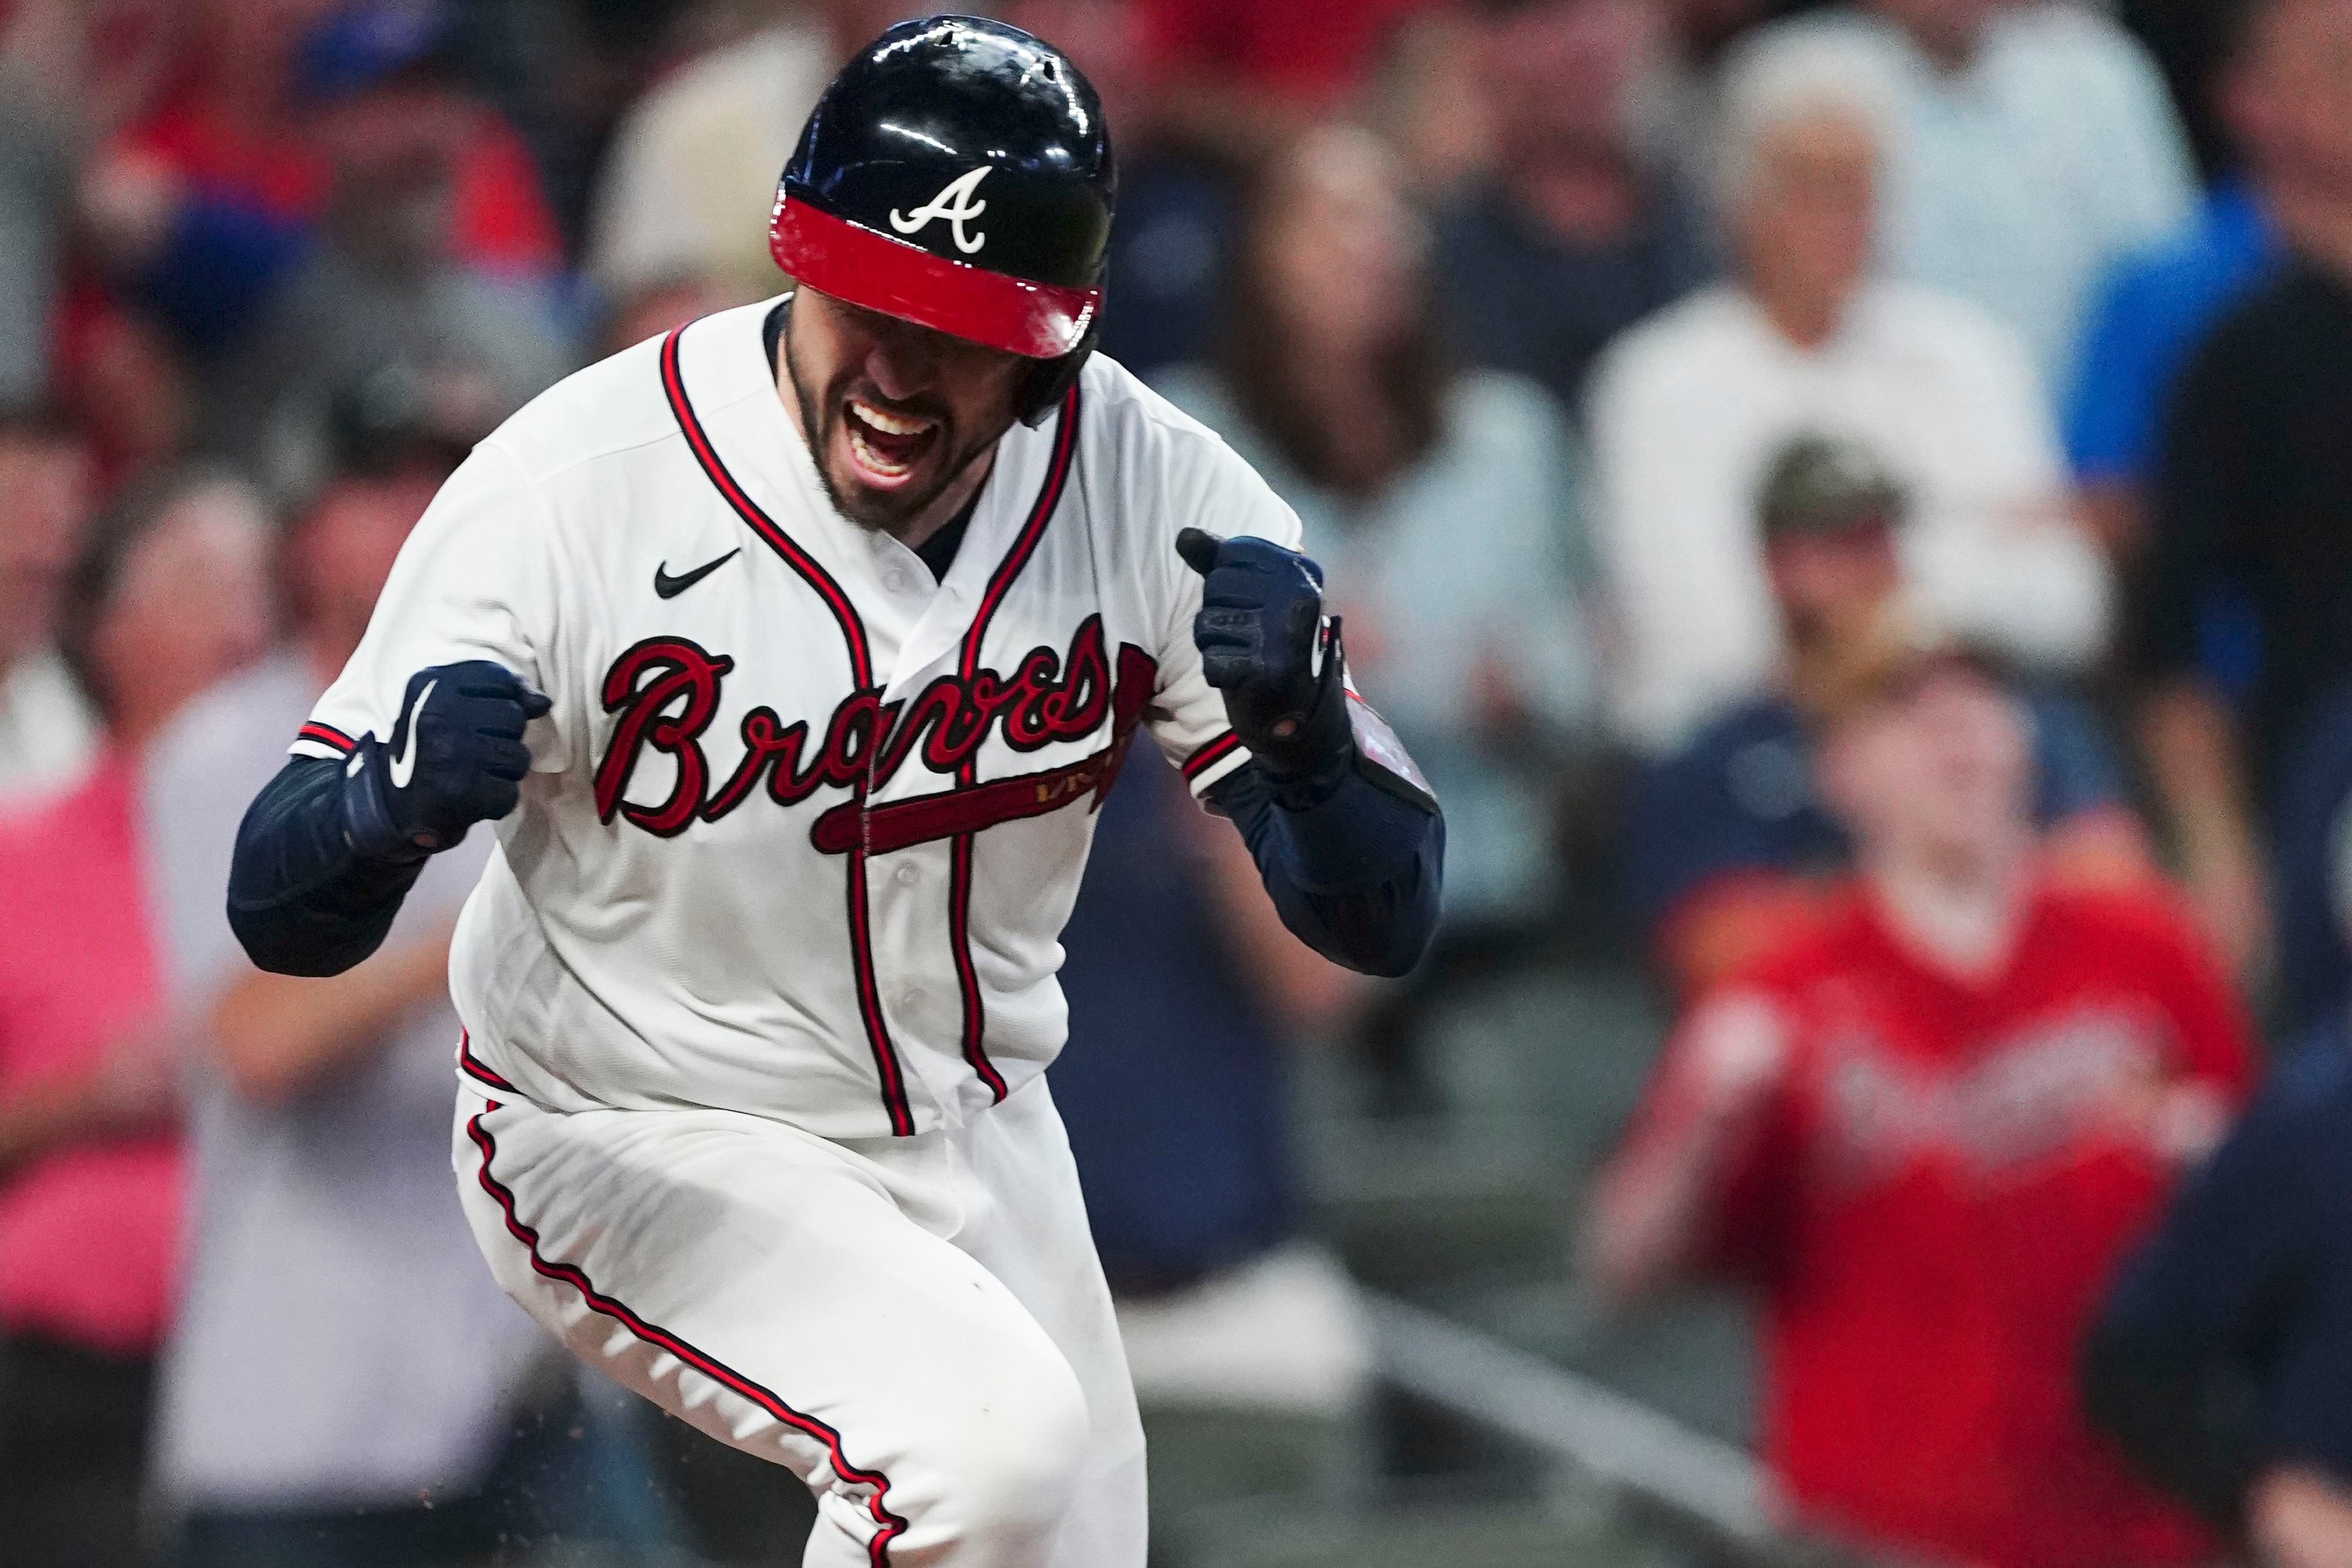 Freeman HR sends Braves to NLCS with 5-4 win over Brewers